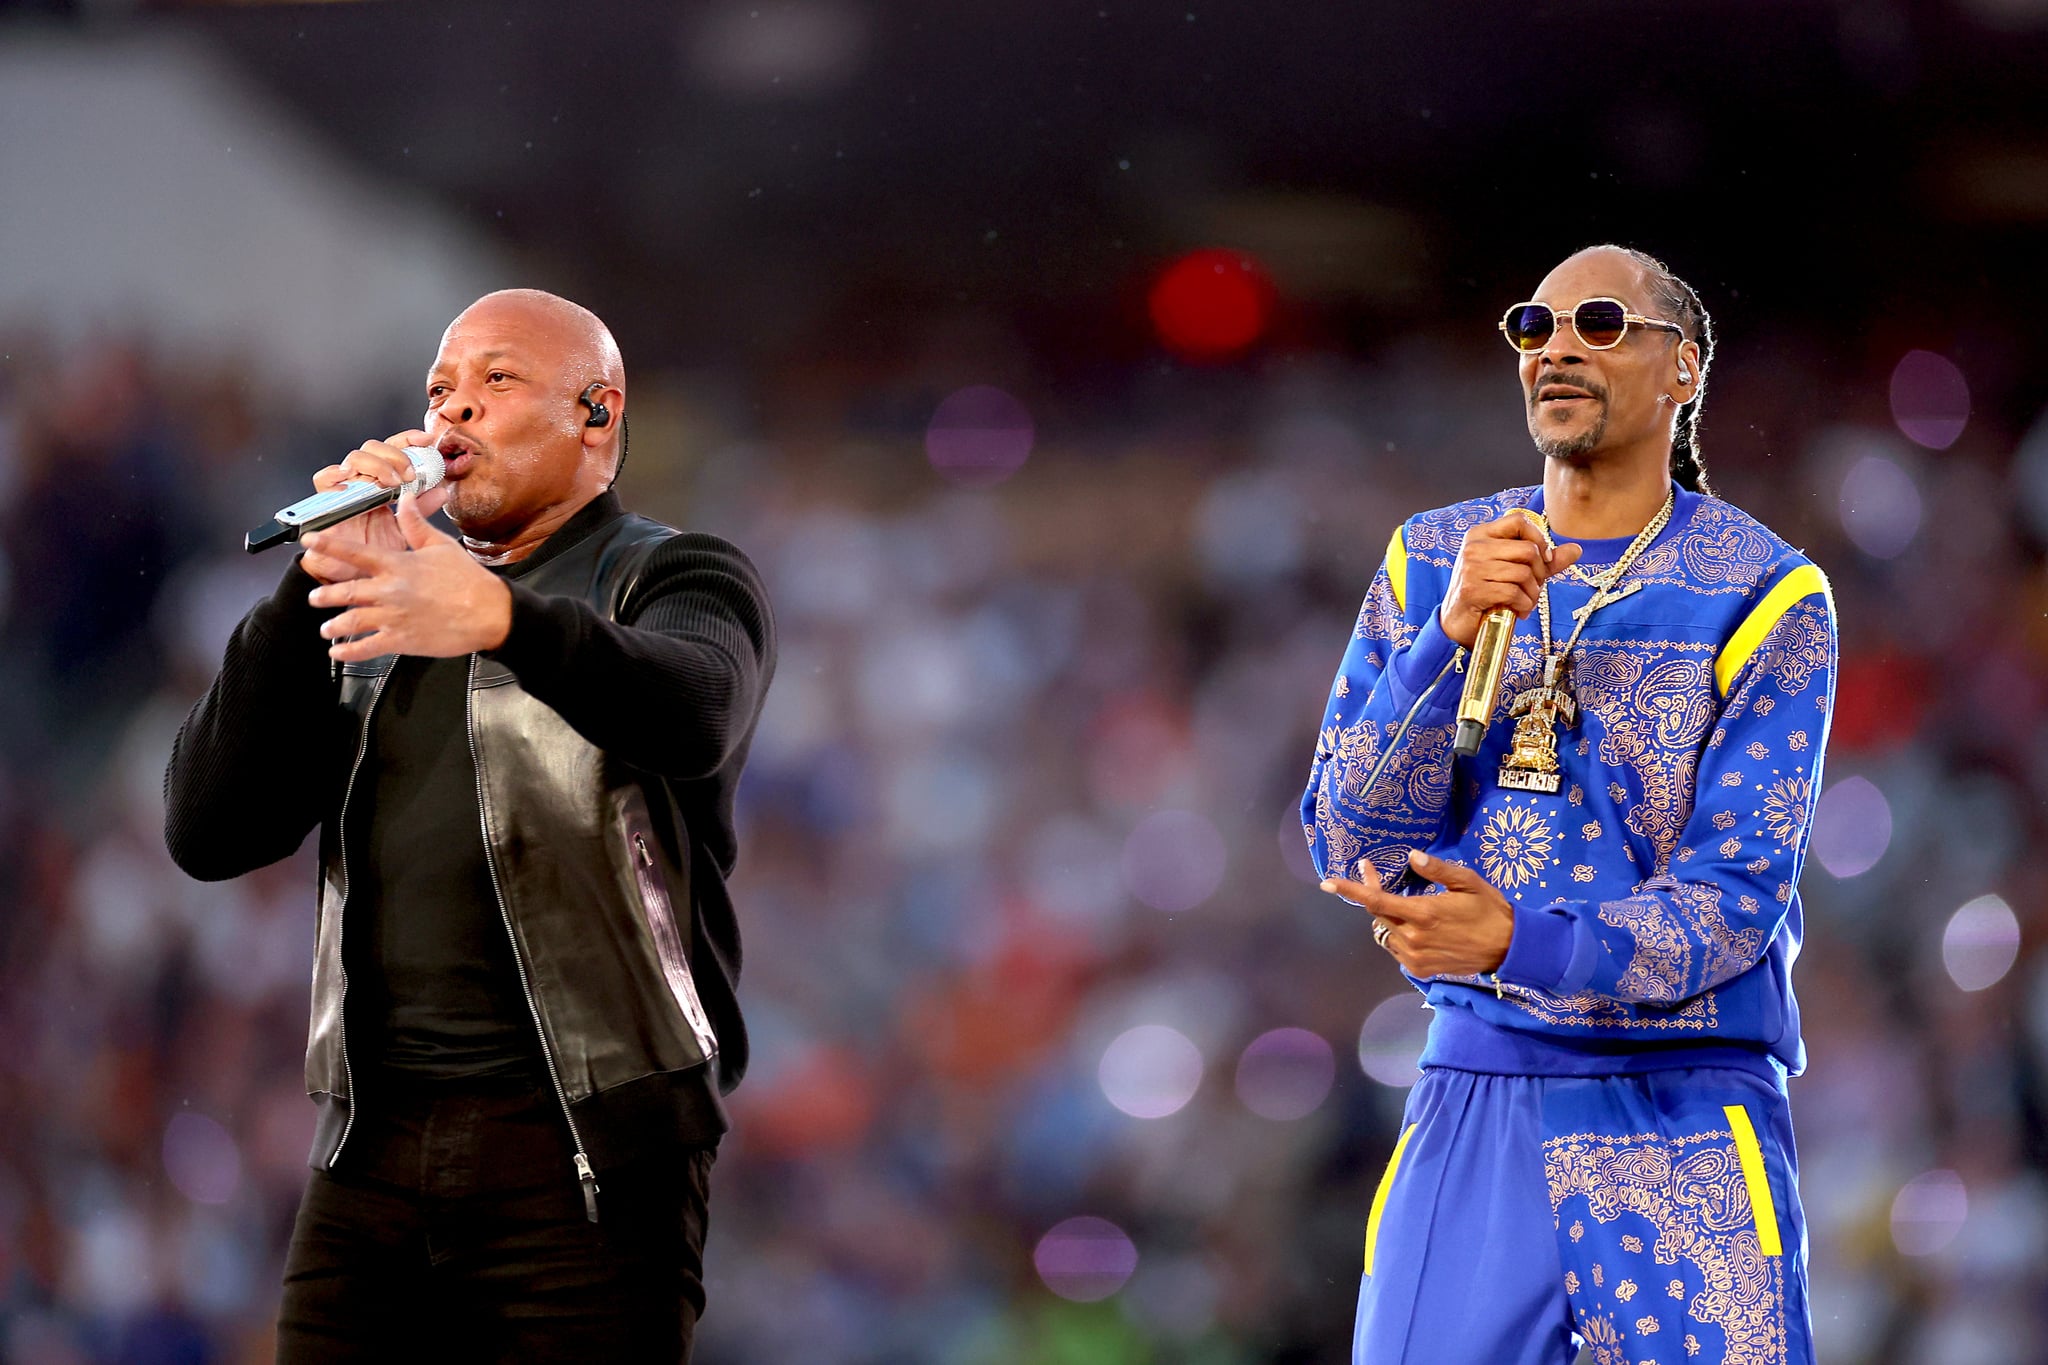 INGLEWOOD, CALIFORNIA - FEBRUARY 13: (L-R) Dr. Dre and Snoop Dogg perform during the Pepsi Super Bowl LVI Halftime Show at SoFi Stadium on February 13, 2022 in Inglewood, California. (Photo by Kevin C. Cox/Getty Images)